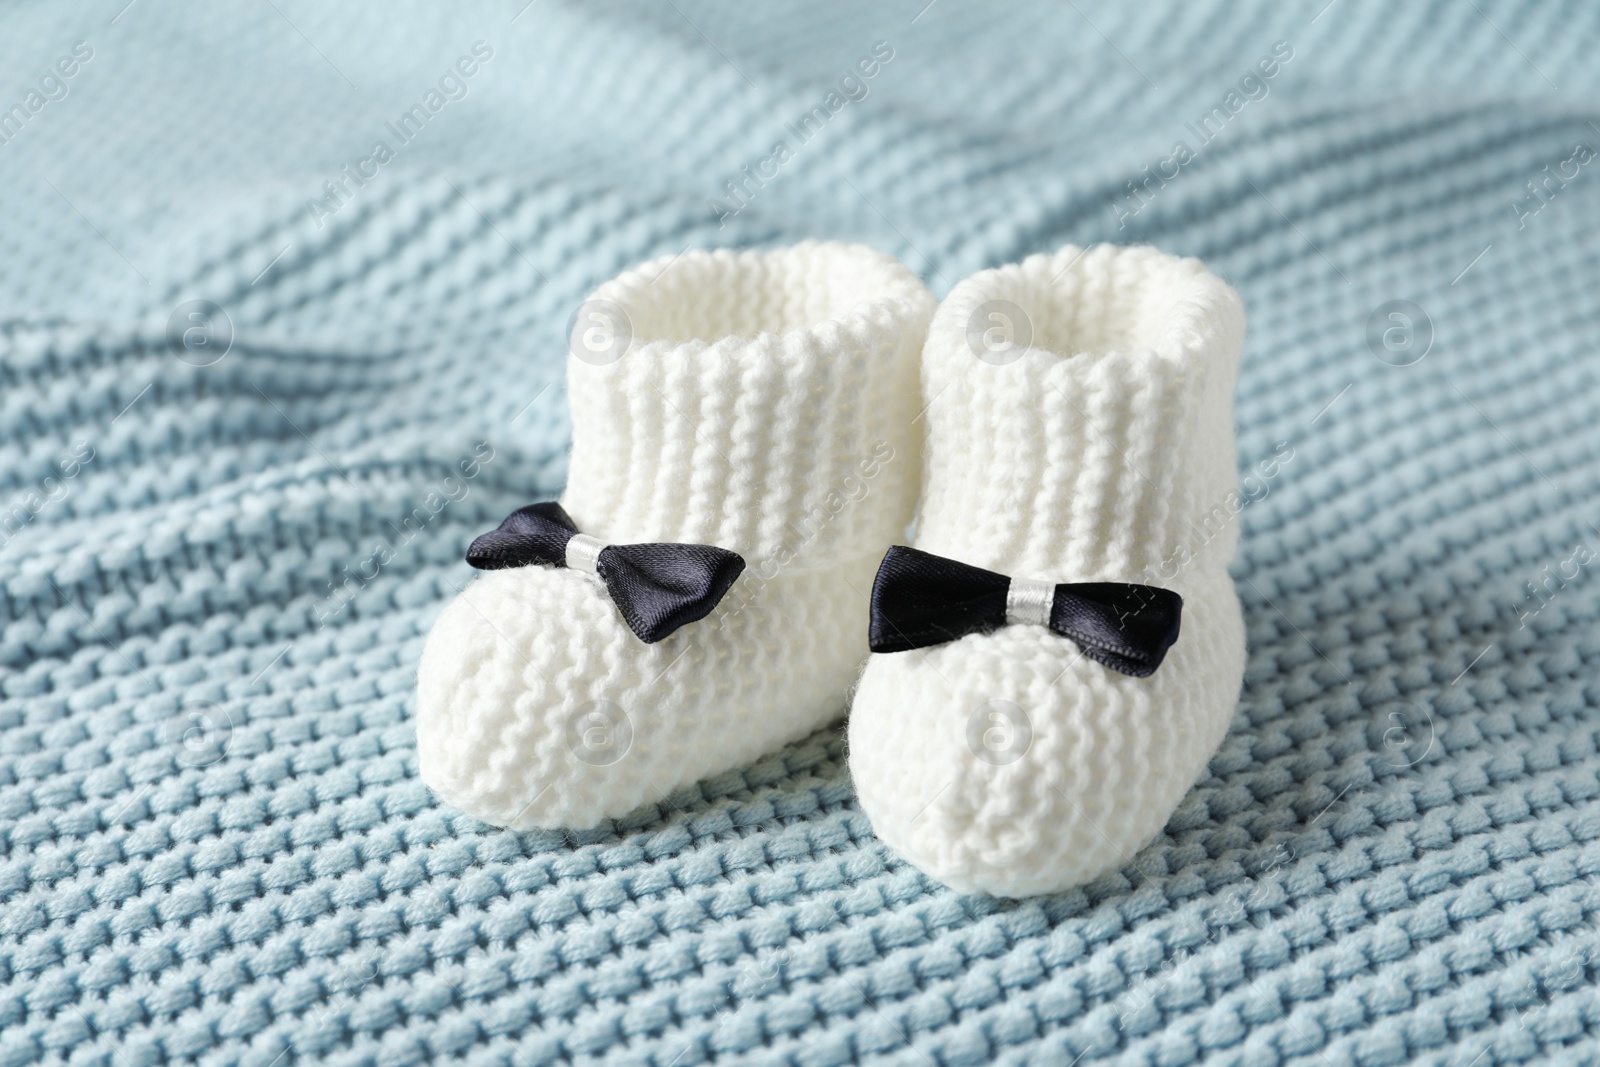 Photo of Handmade baby booties on soft knitted plaid